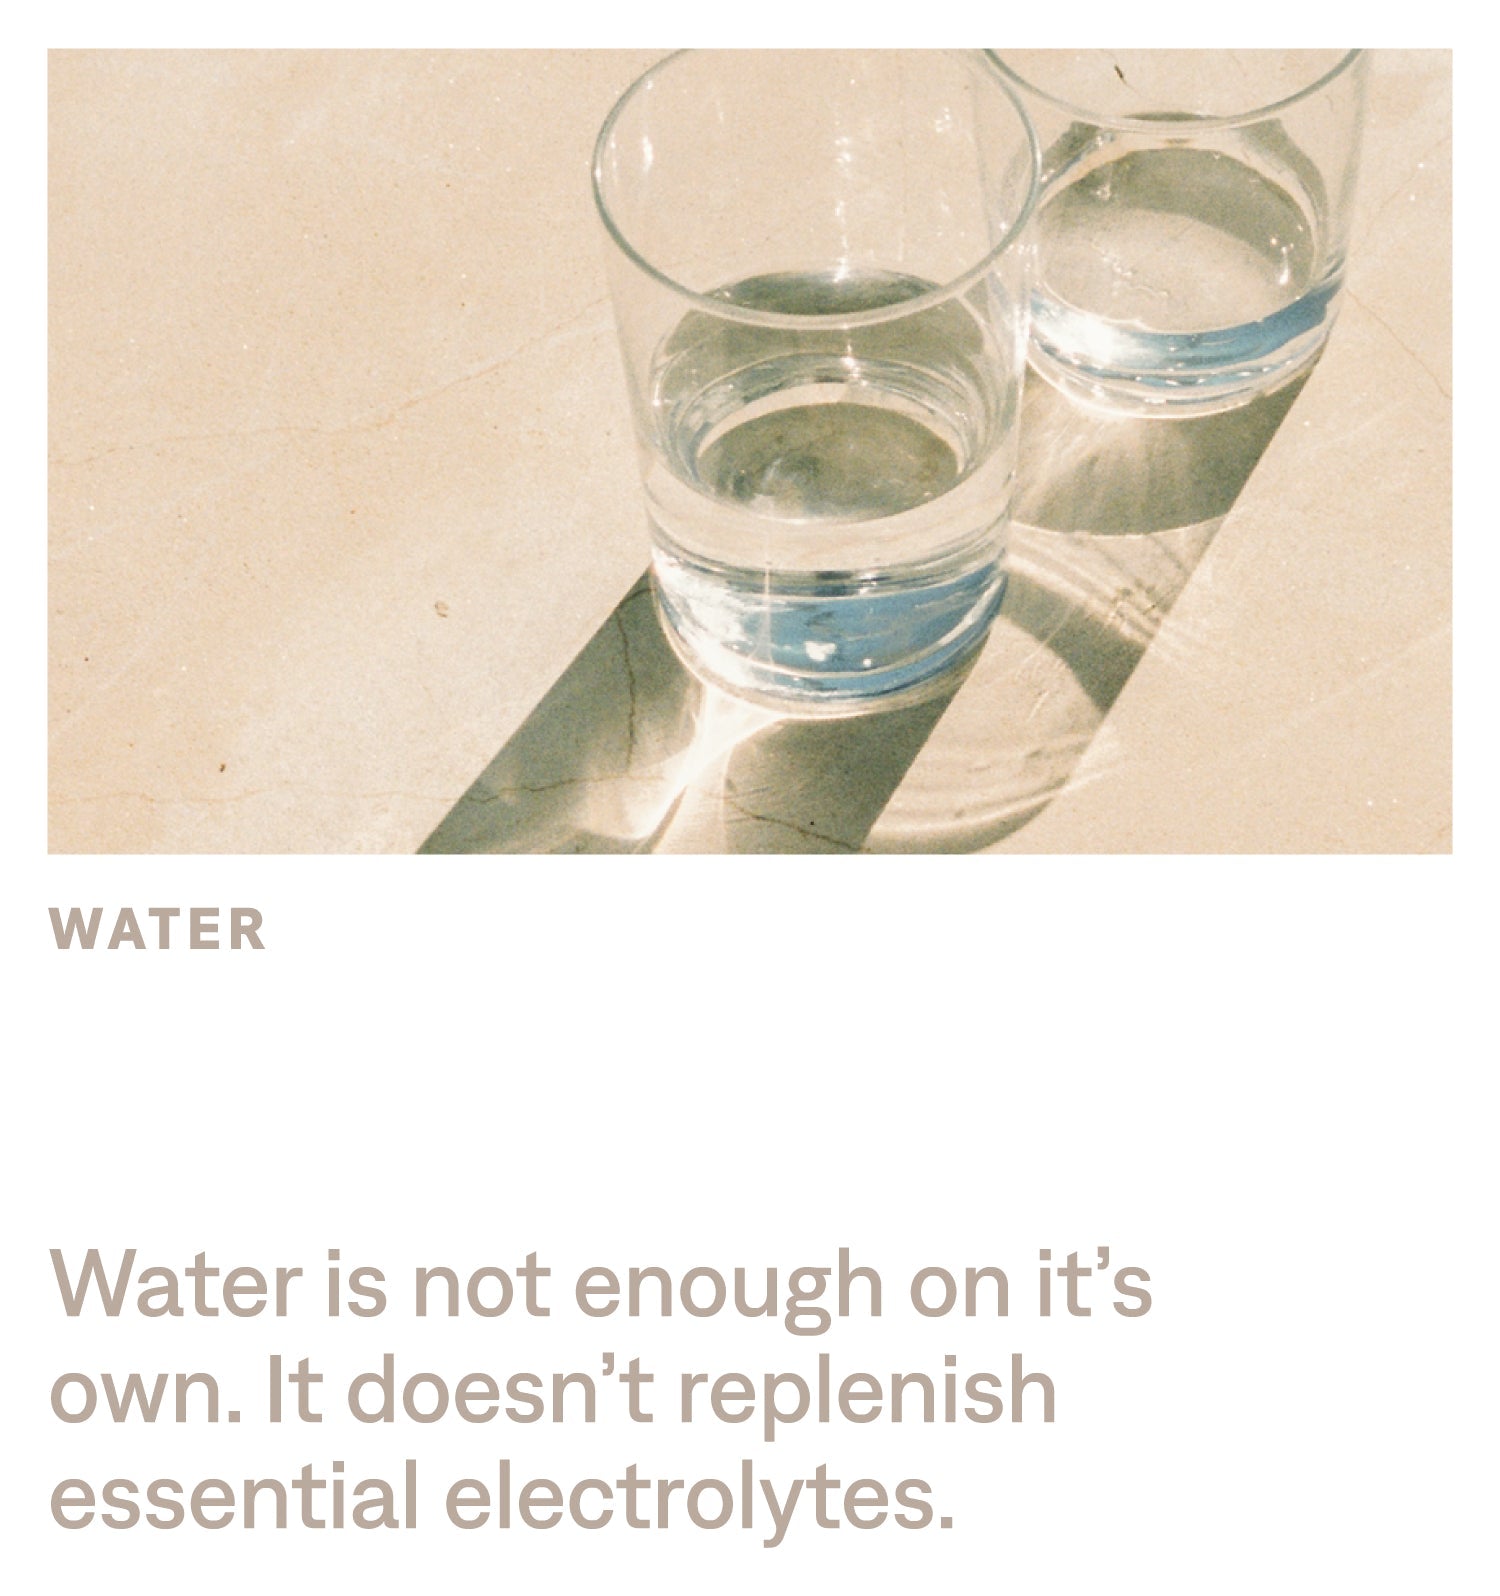 Water is not enough on it's own.  It doesn't replenish essential electrolytes.